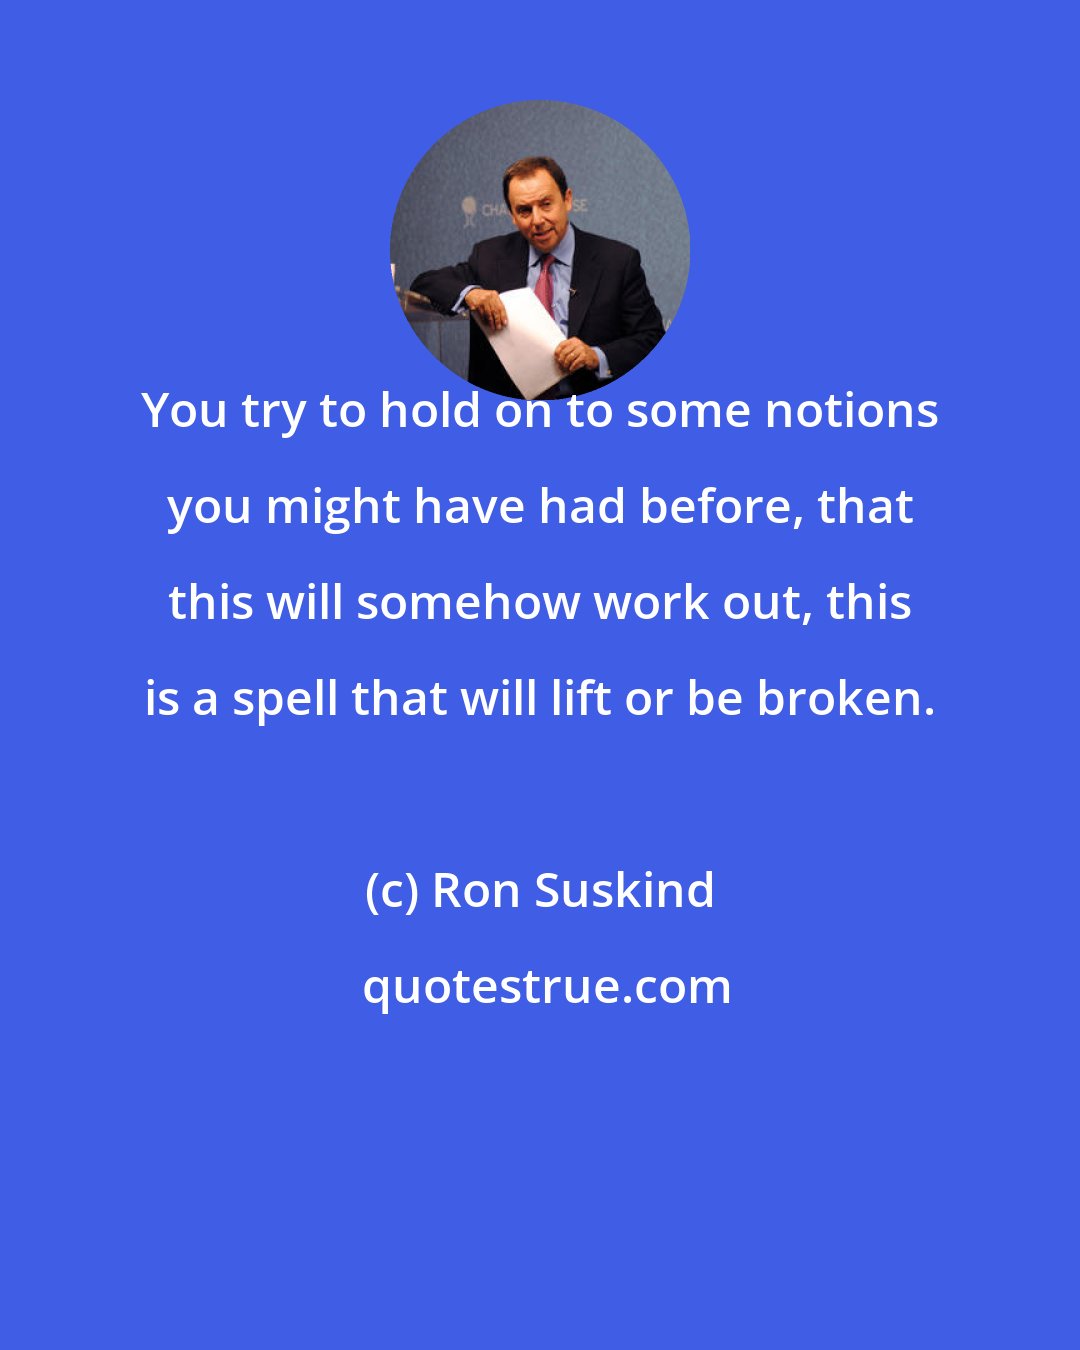 Ron Suskind: You try to hold on to some notions you might have had before, that this will somehow work out, this is a spell that will lift or be broken.